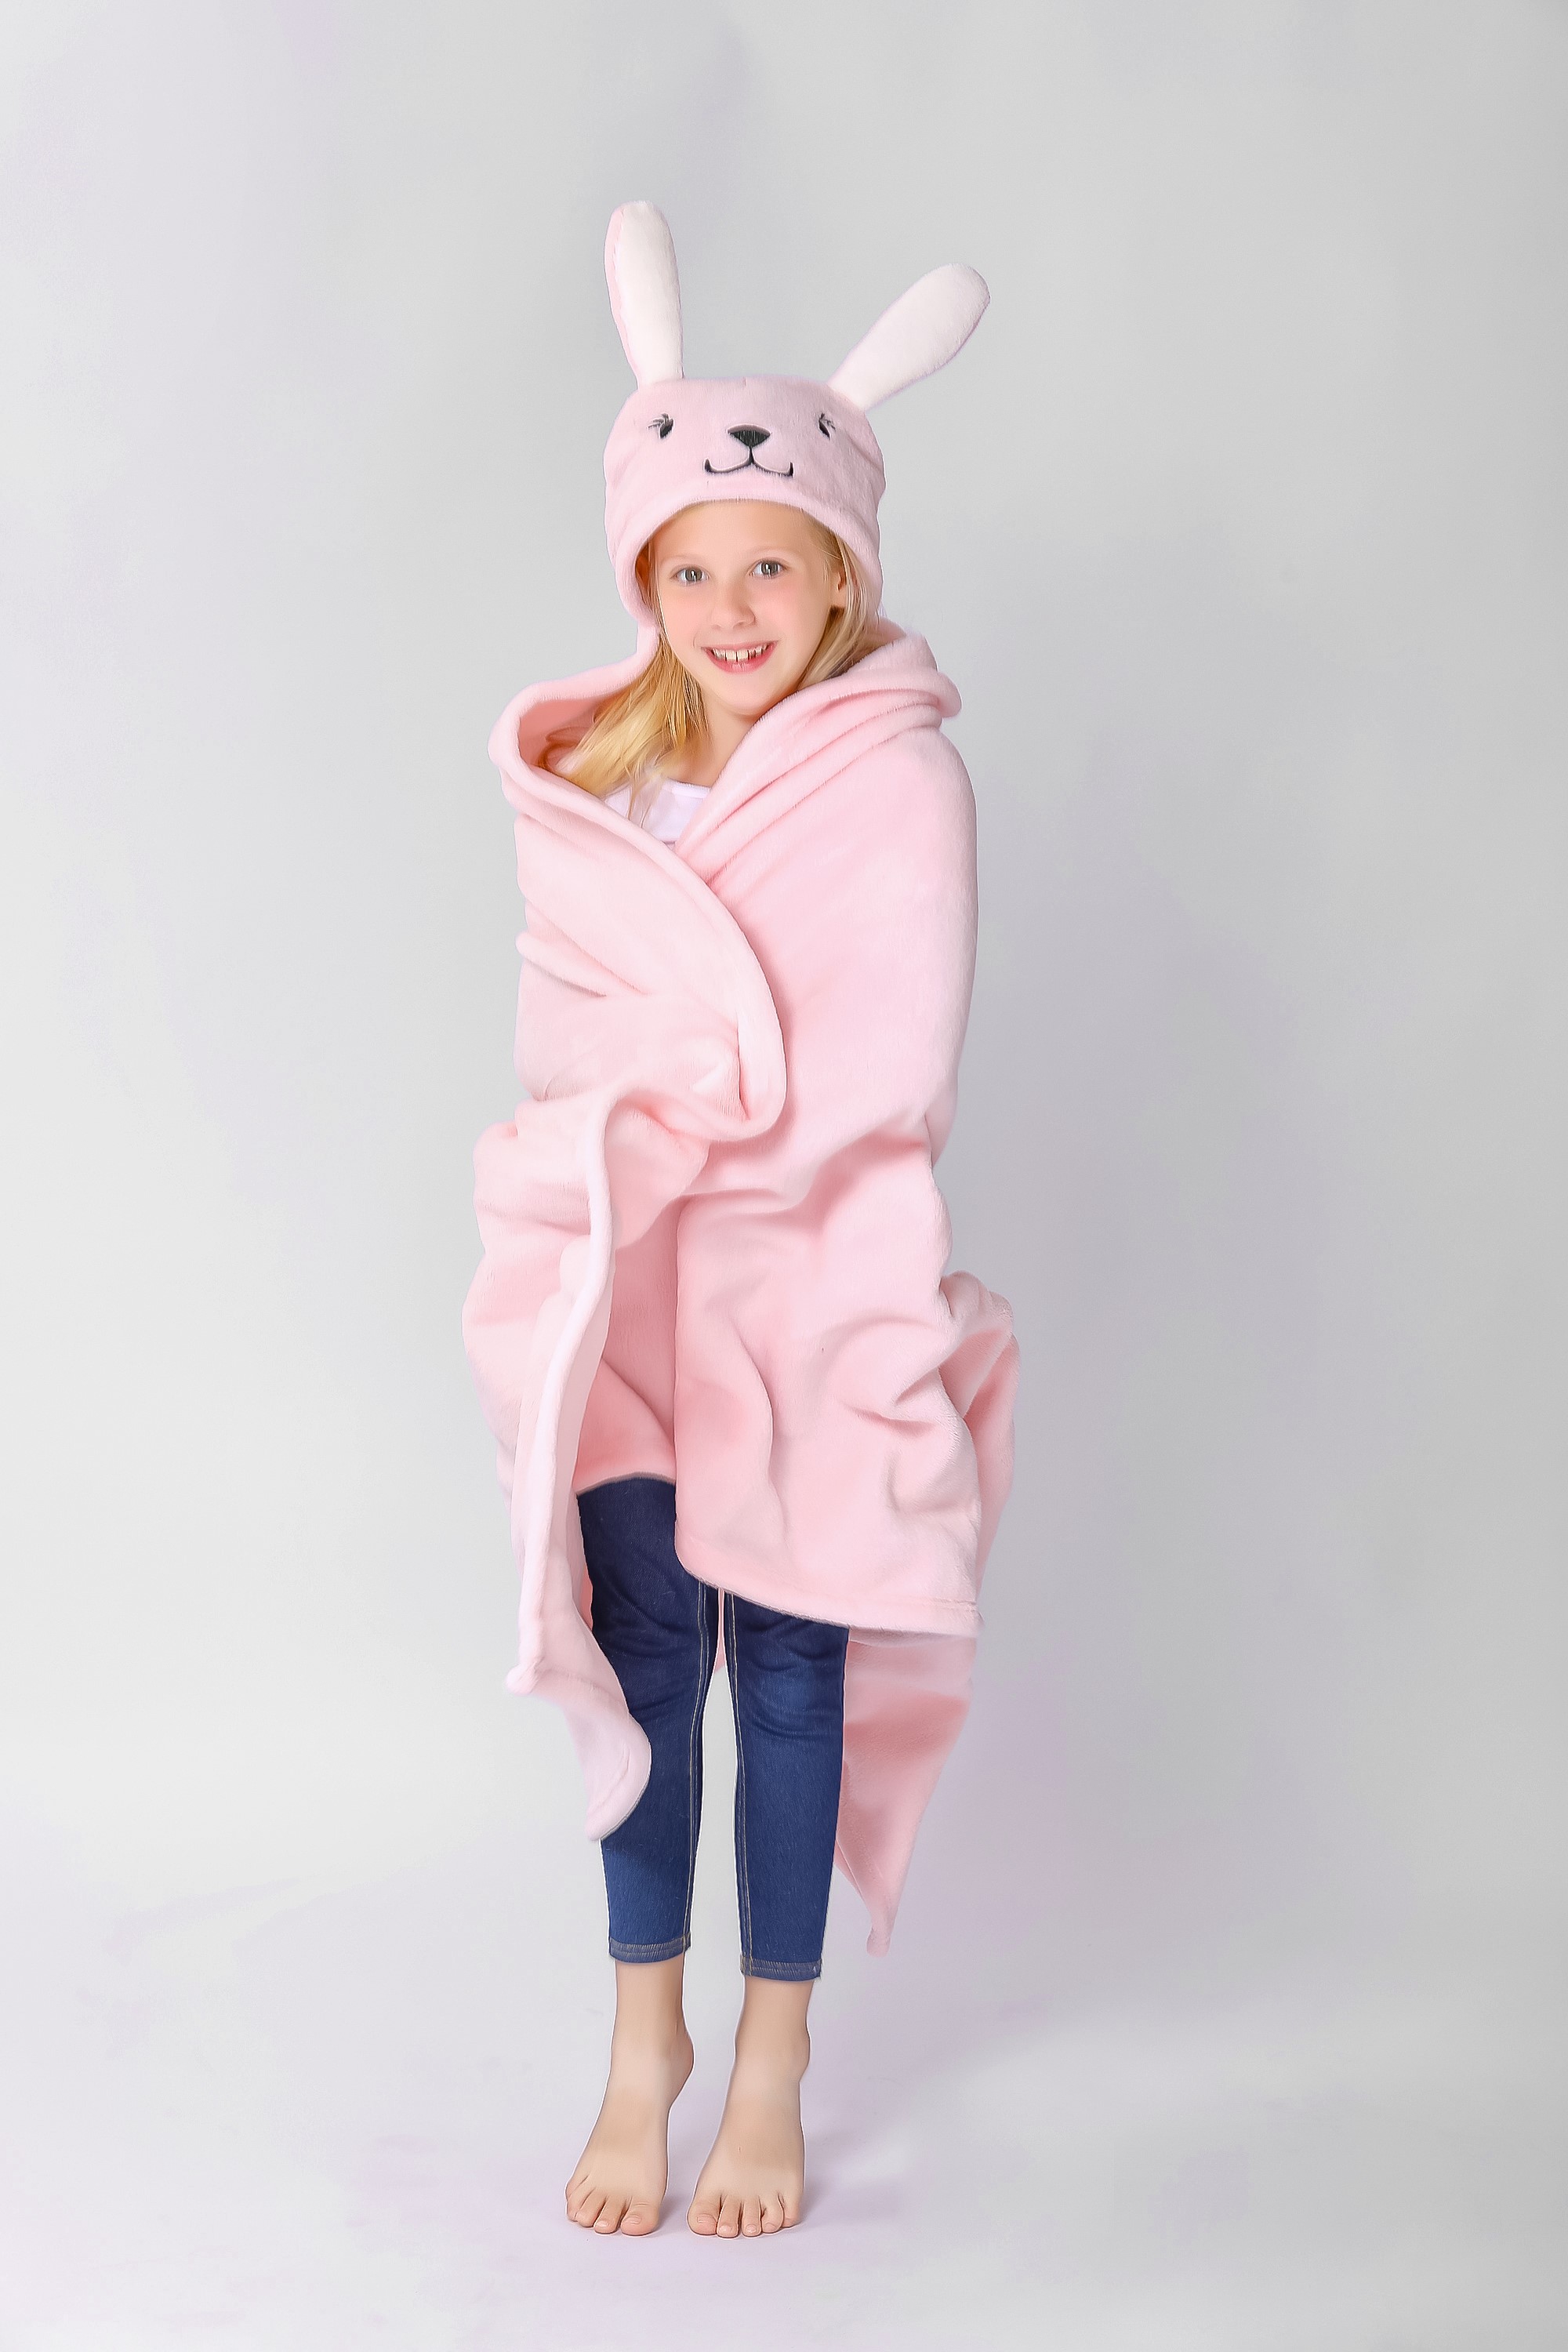 Pink Bunny Hooded Throw for Kids by Down Home - image 2 of 2